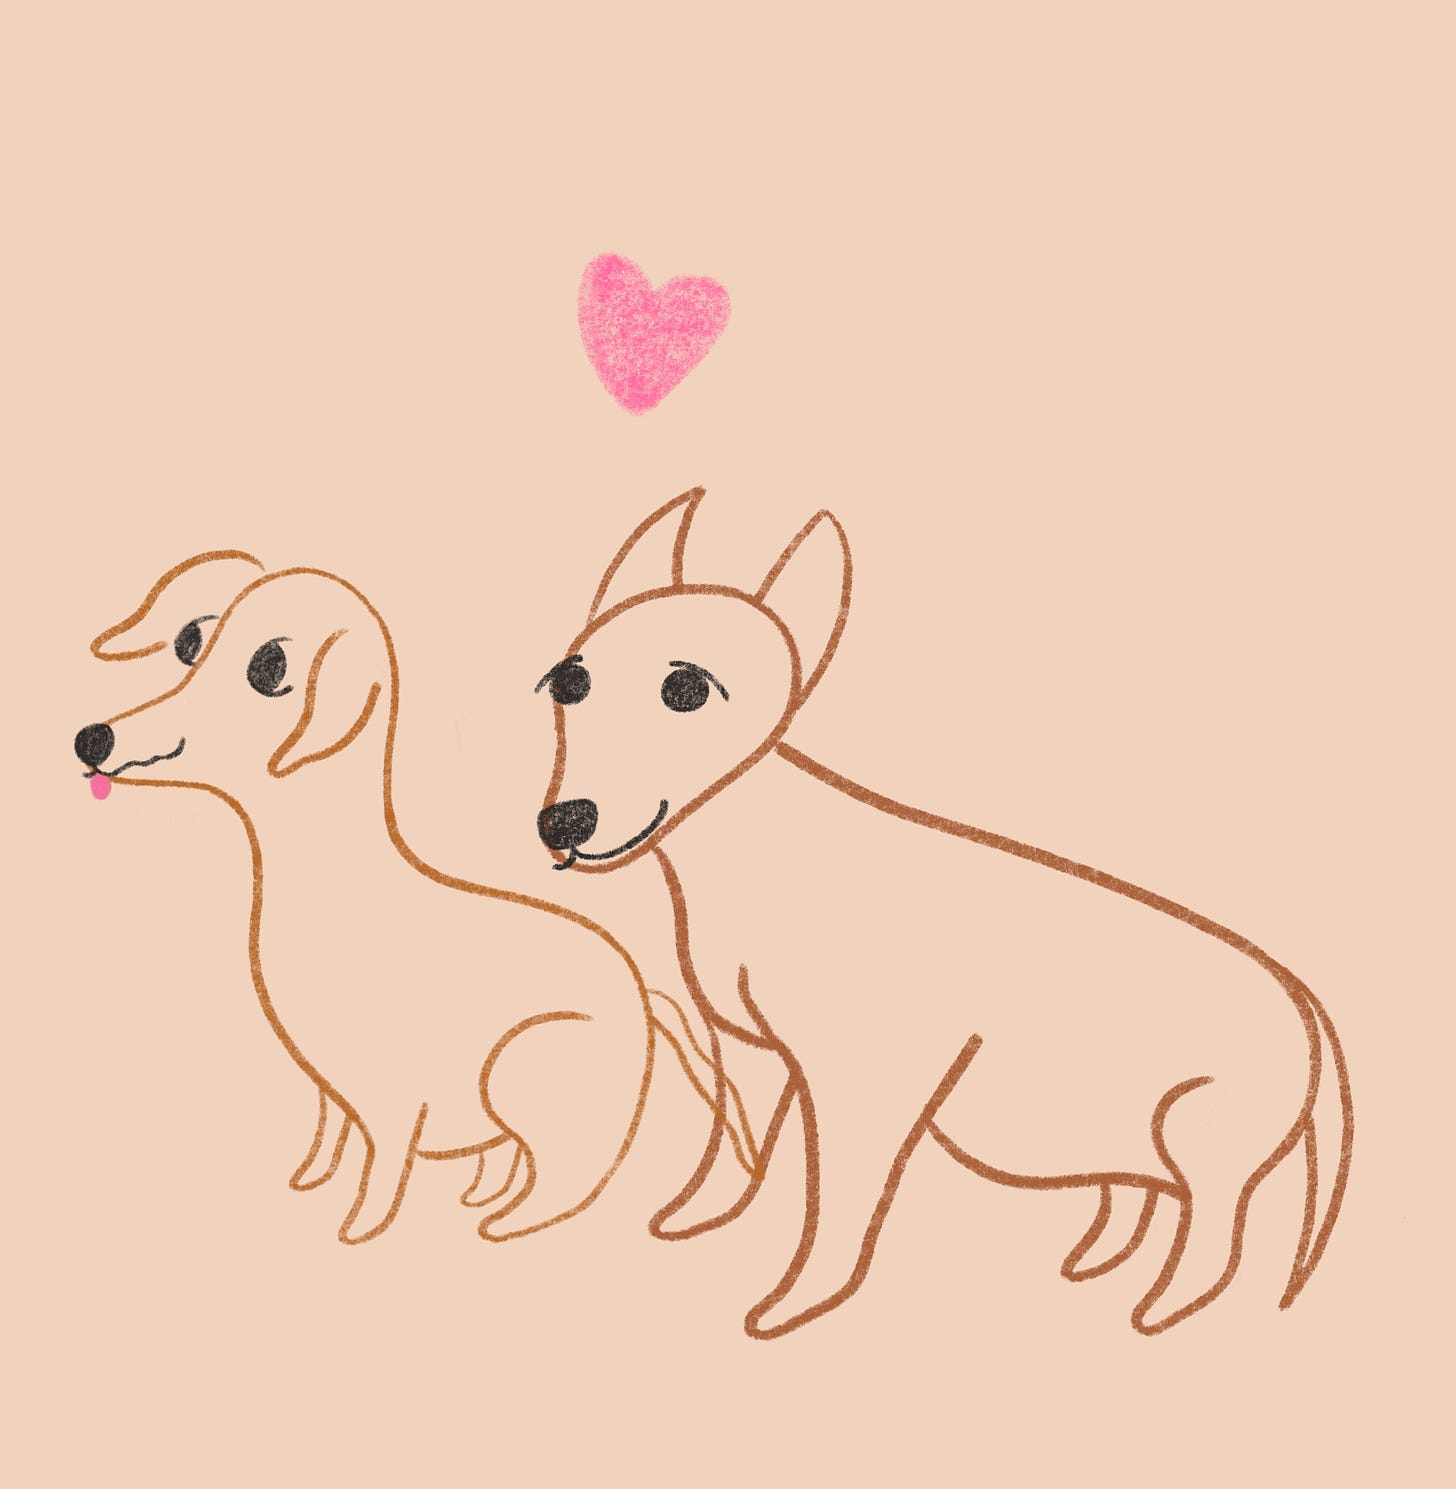 a creamy beige background, there are two simple line drawings of Pancho and Scooter from left to right Pancho is smaller and a chihuahua and is sticking out his tongue, he has buggy eyes and a crinkly smile and is seated to the right of him is Scooter who is slightly larger and is a chihuahua mix, maybe part Shiba Inu he resembles a fox with point ears that stick up in between them is a link pink heart